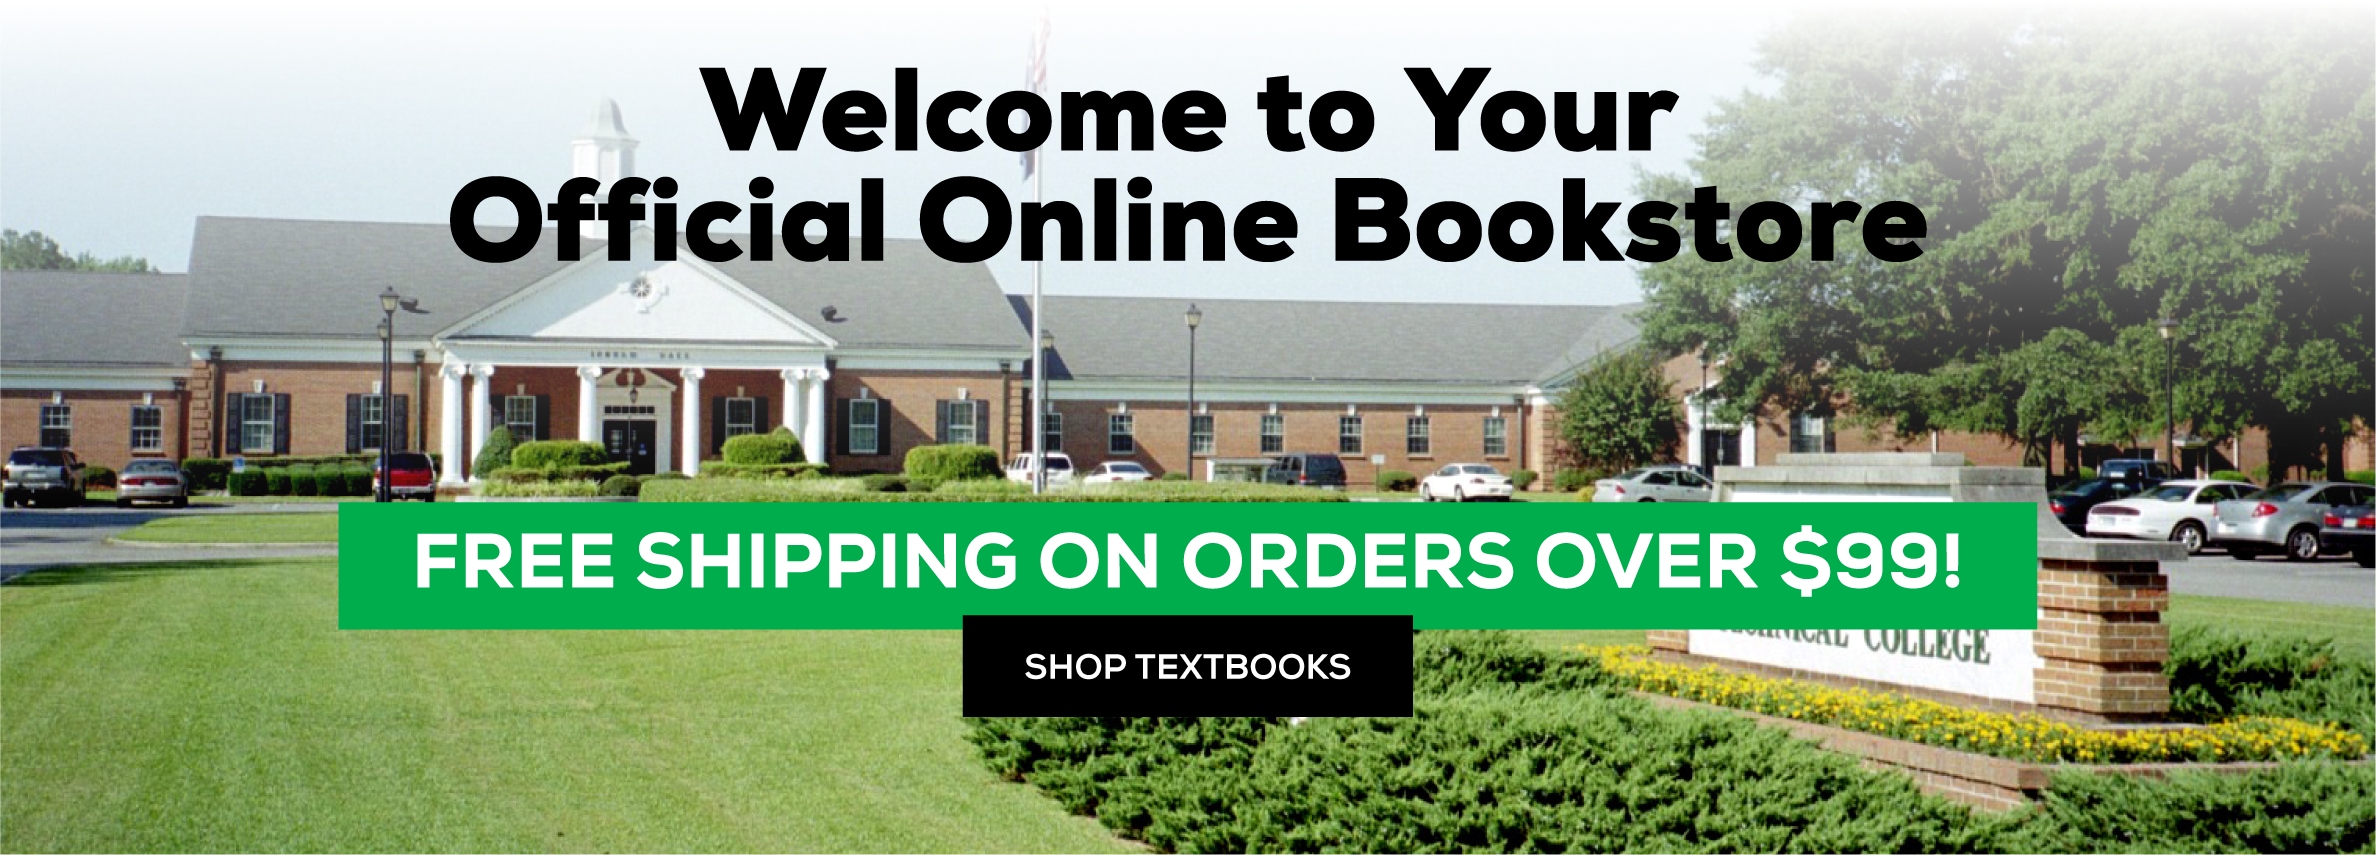 Welcome to your official online bookstore! Free shipping on orders over $35! Shop Textbooks.